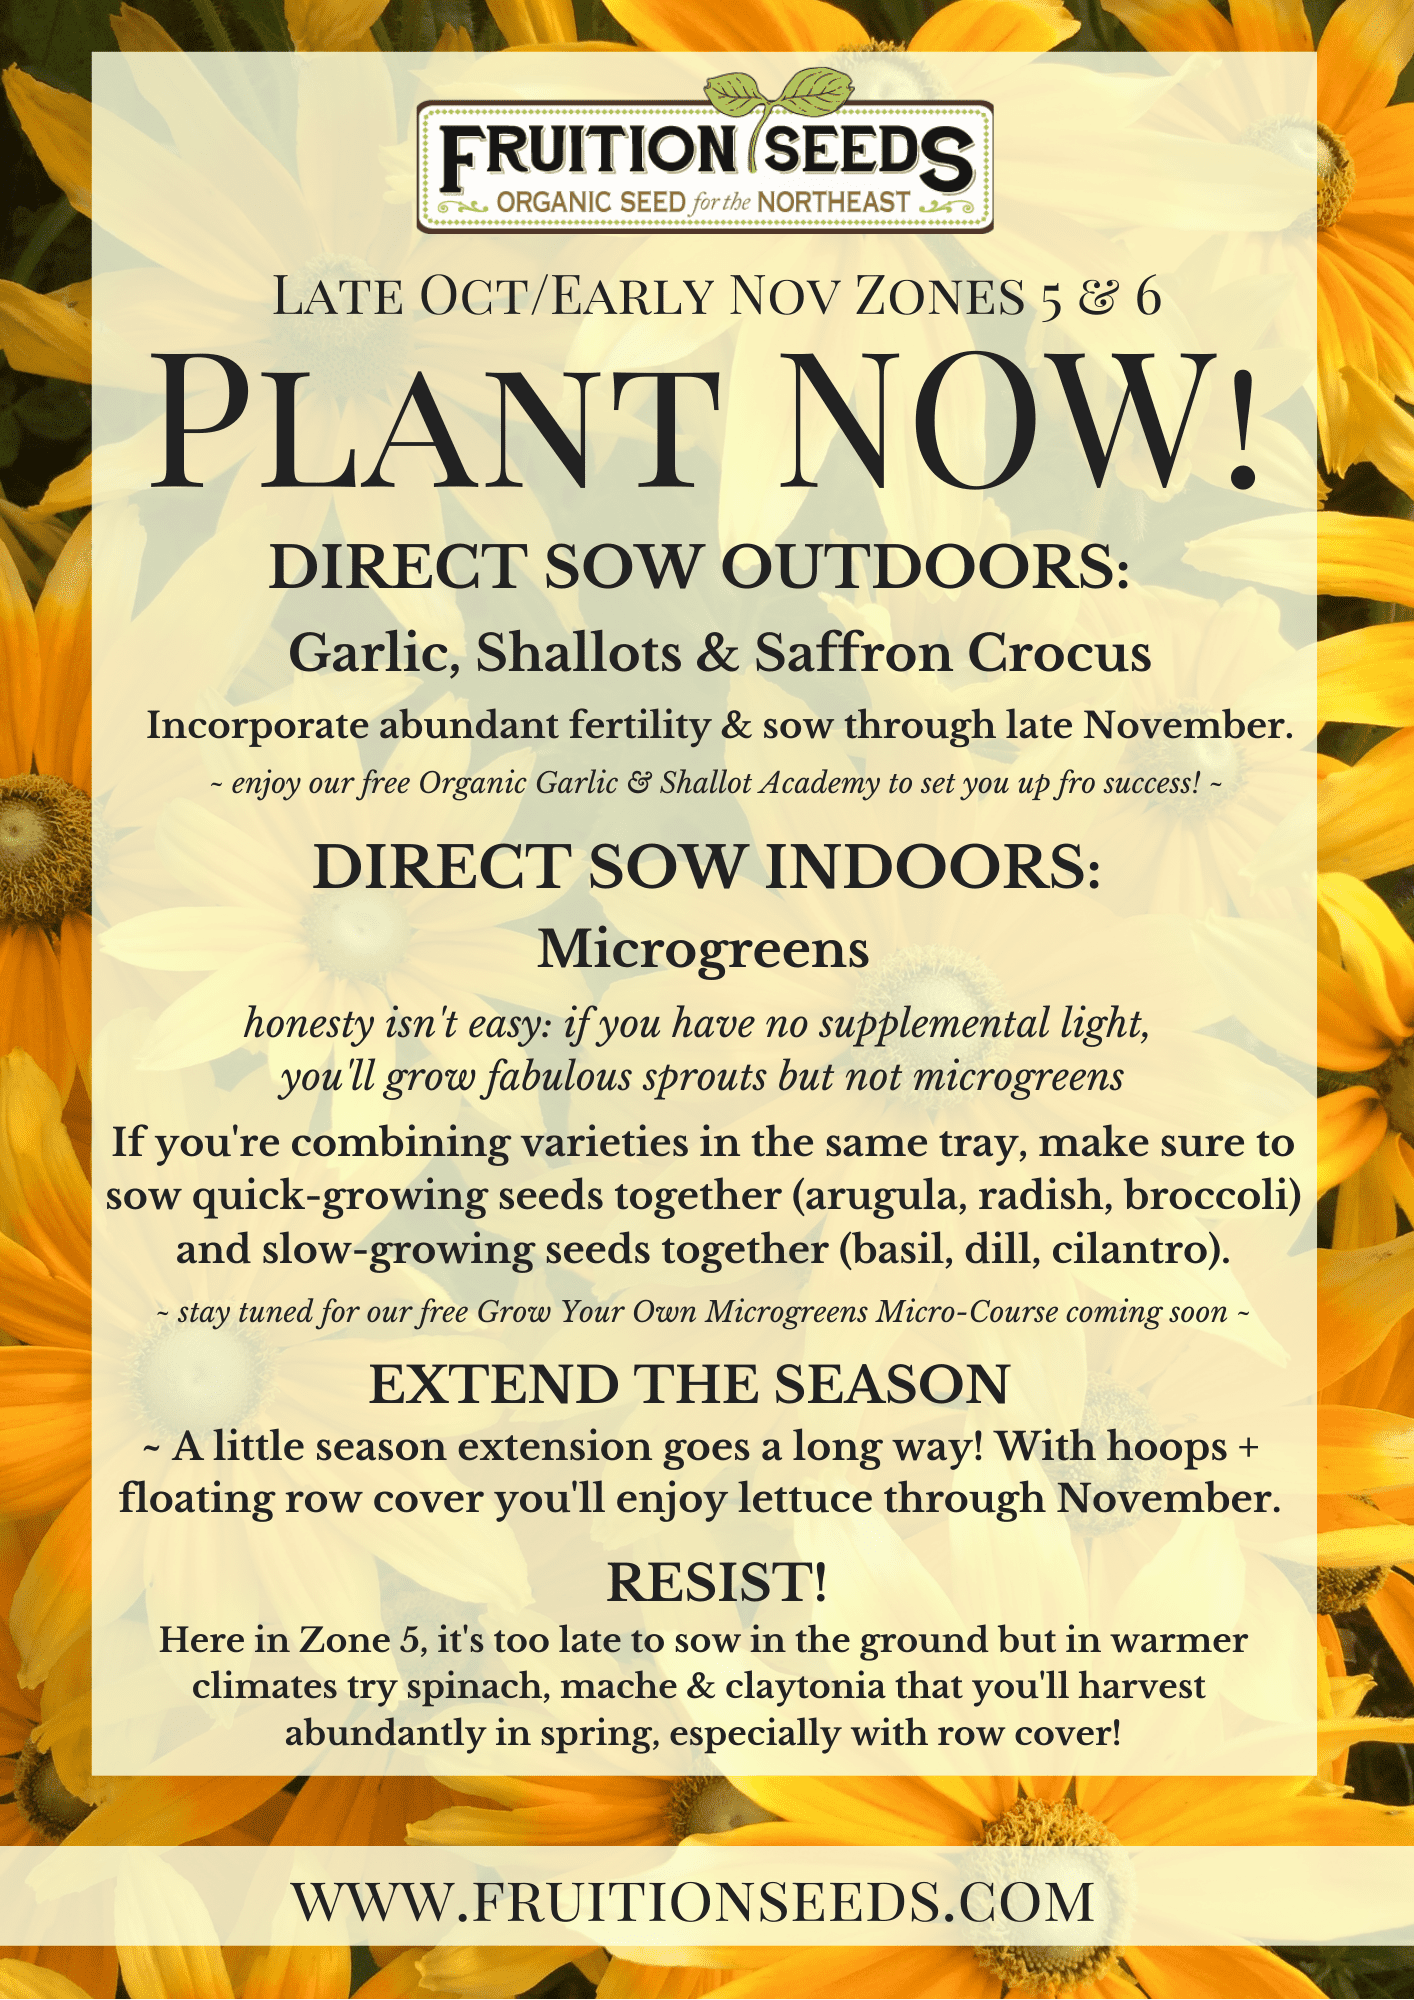 Growing Guide for November Plant Now